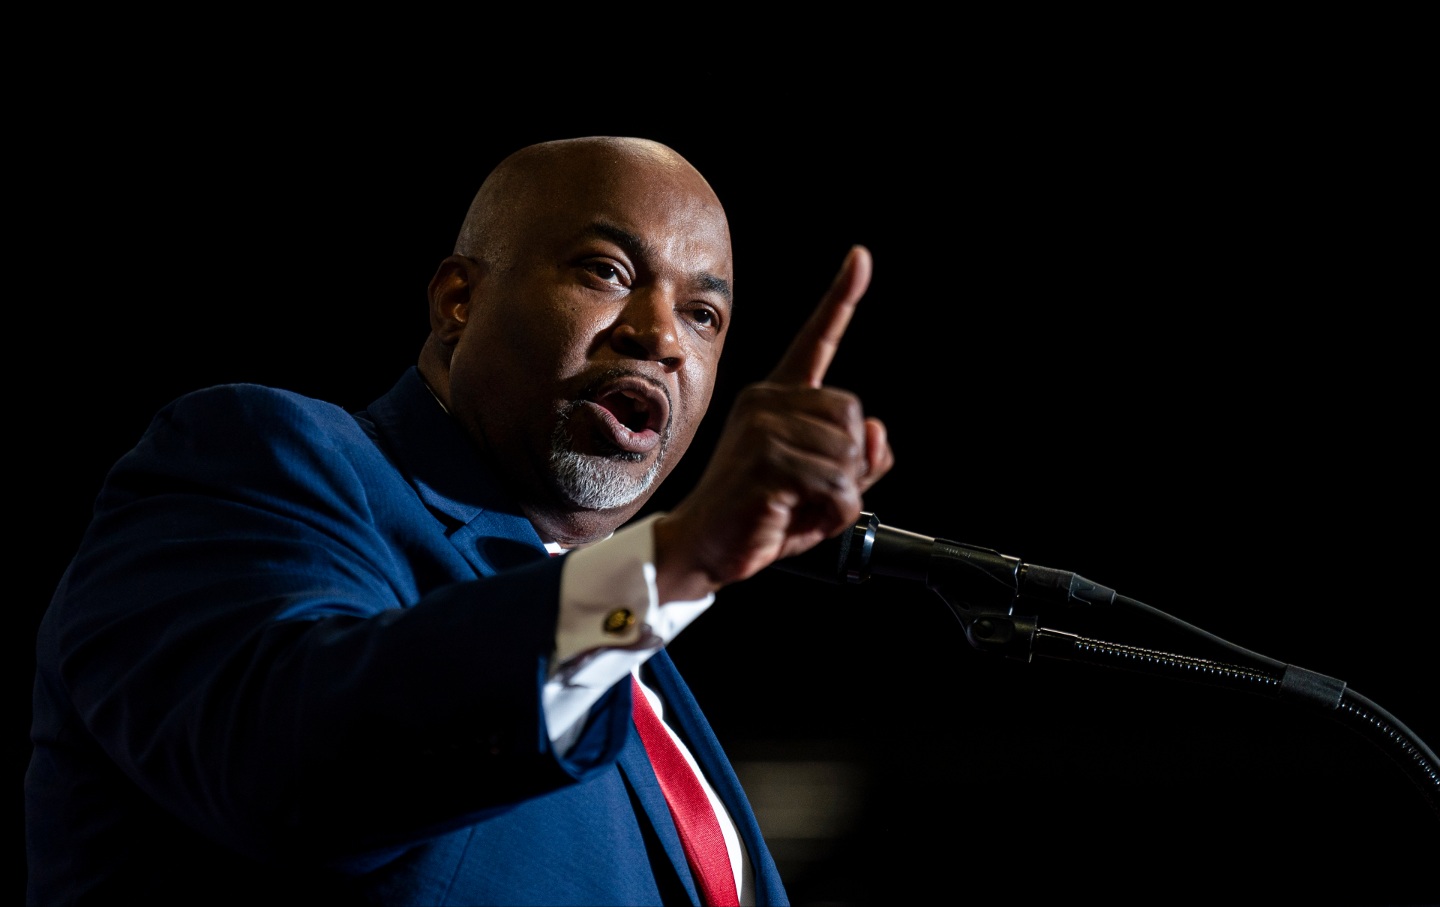 Mark Robinson, lieutenant governor of North Carolina, speaks during a "Get Out The Vote" rally with former US President Donald Trump in Greensboro, North Carolina, US, on Saturday, March 2, 2024.